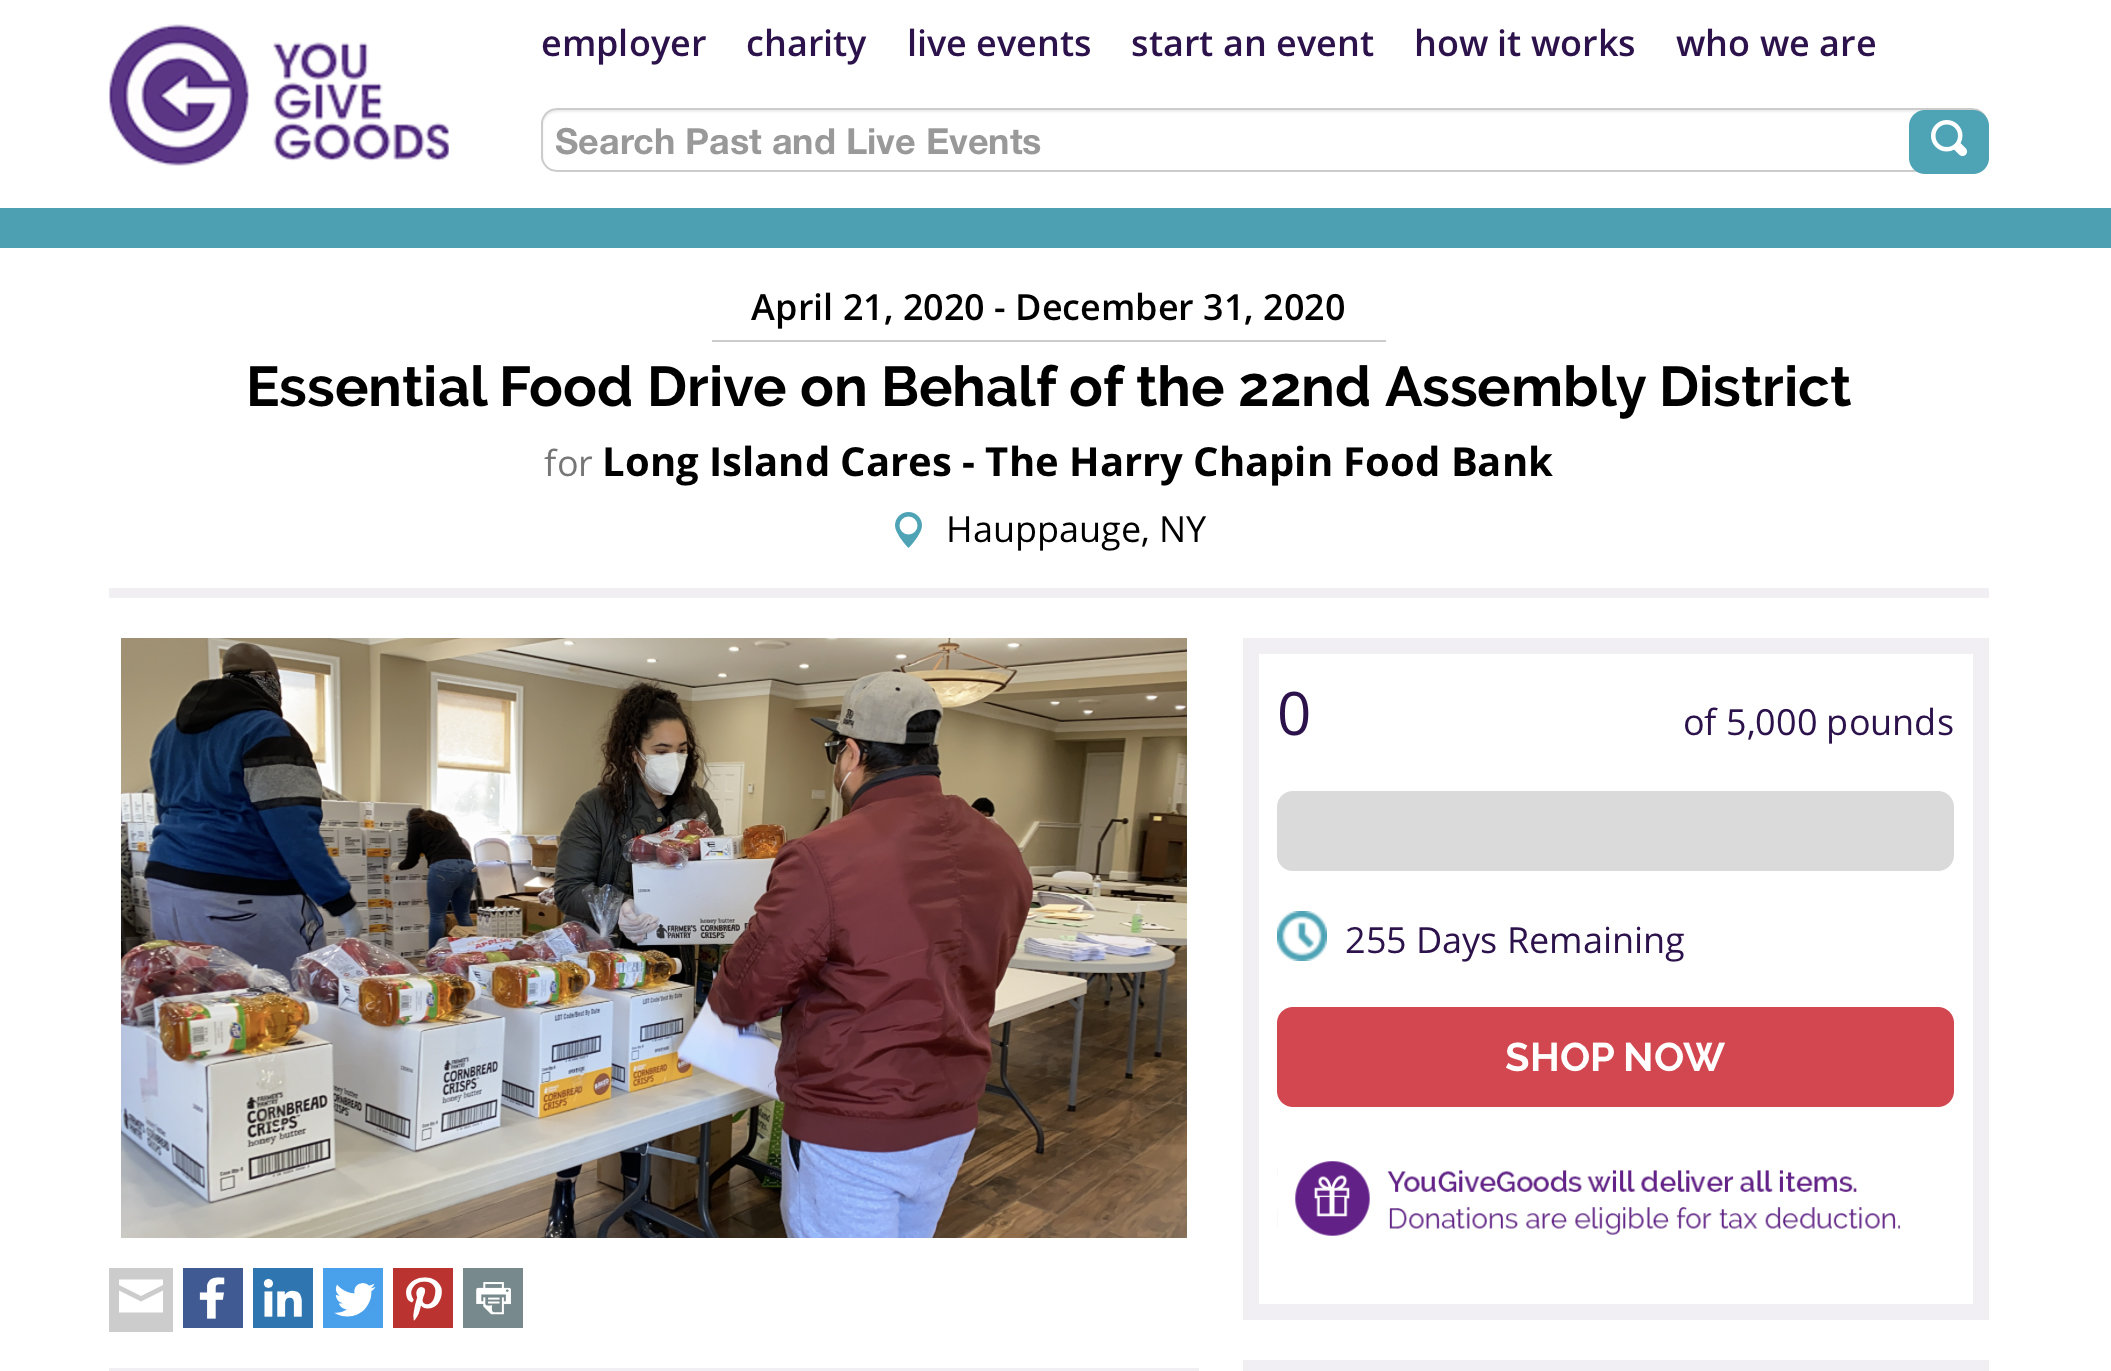 Assemblywoman Michaelle Solages is working in partnership with Long Island Cares, Inc to provide supplemental food support to people affected by the coronavirus in the 22nd Assembly District through a virtual food drive.